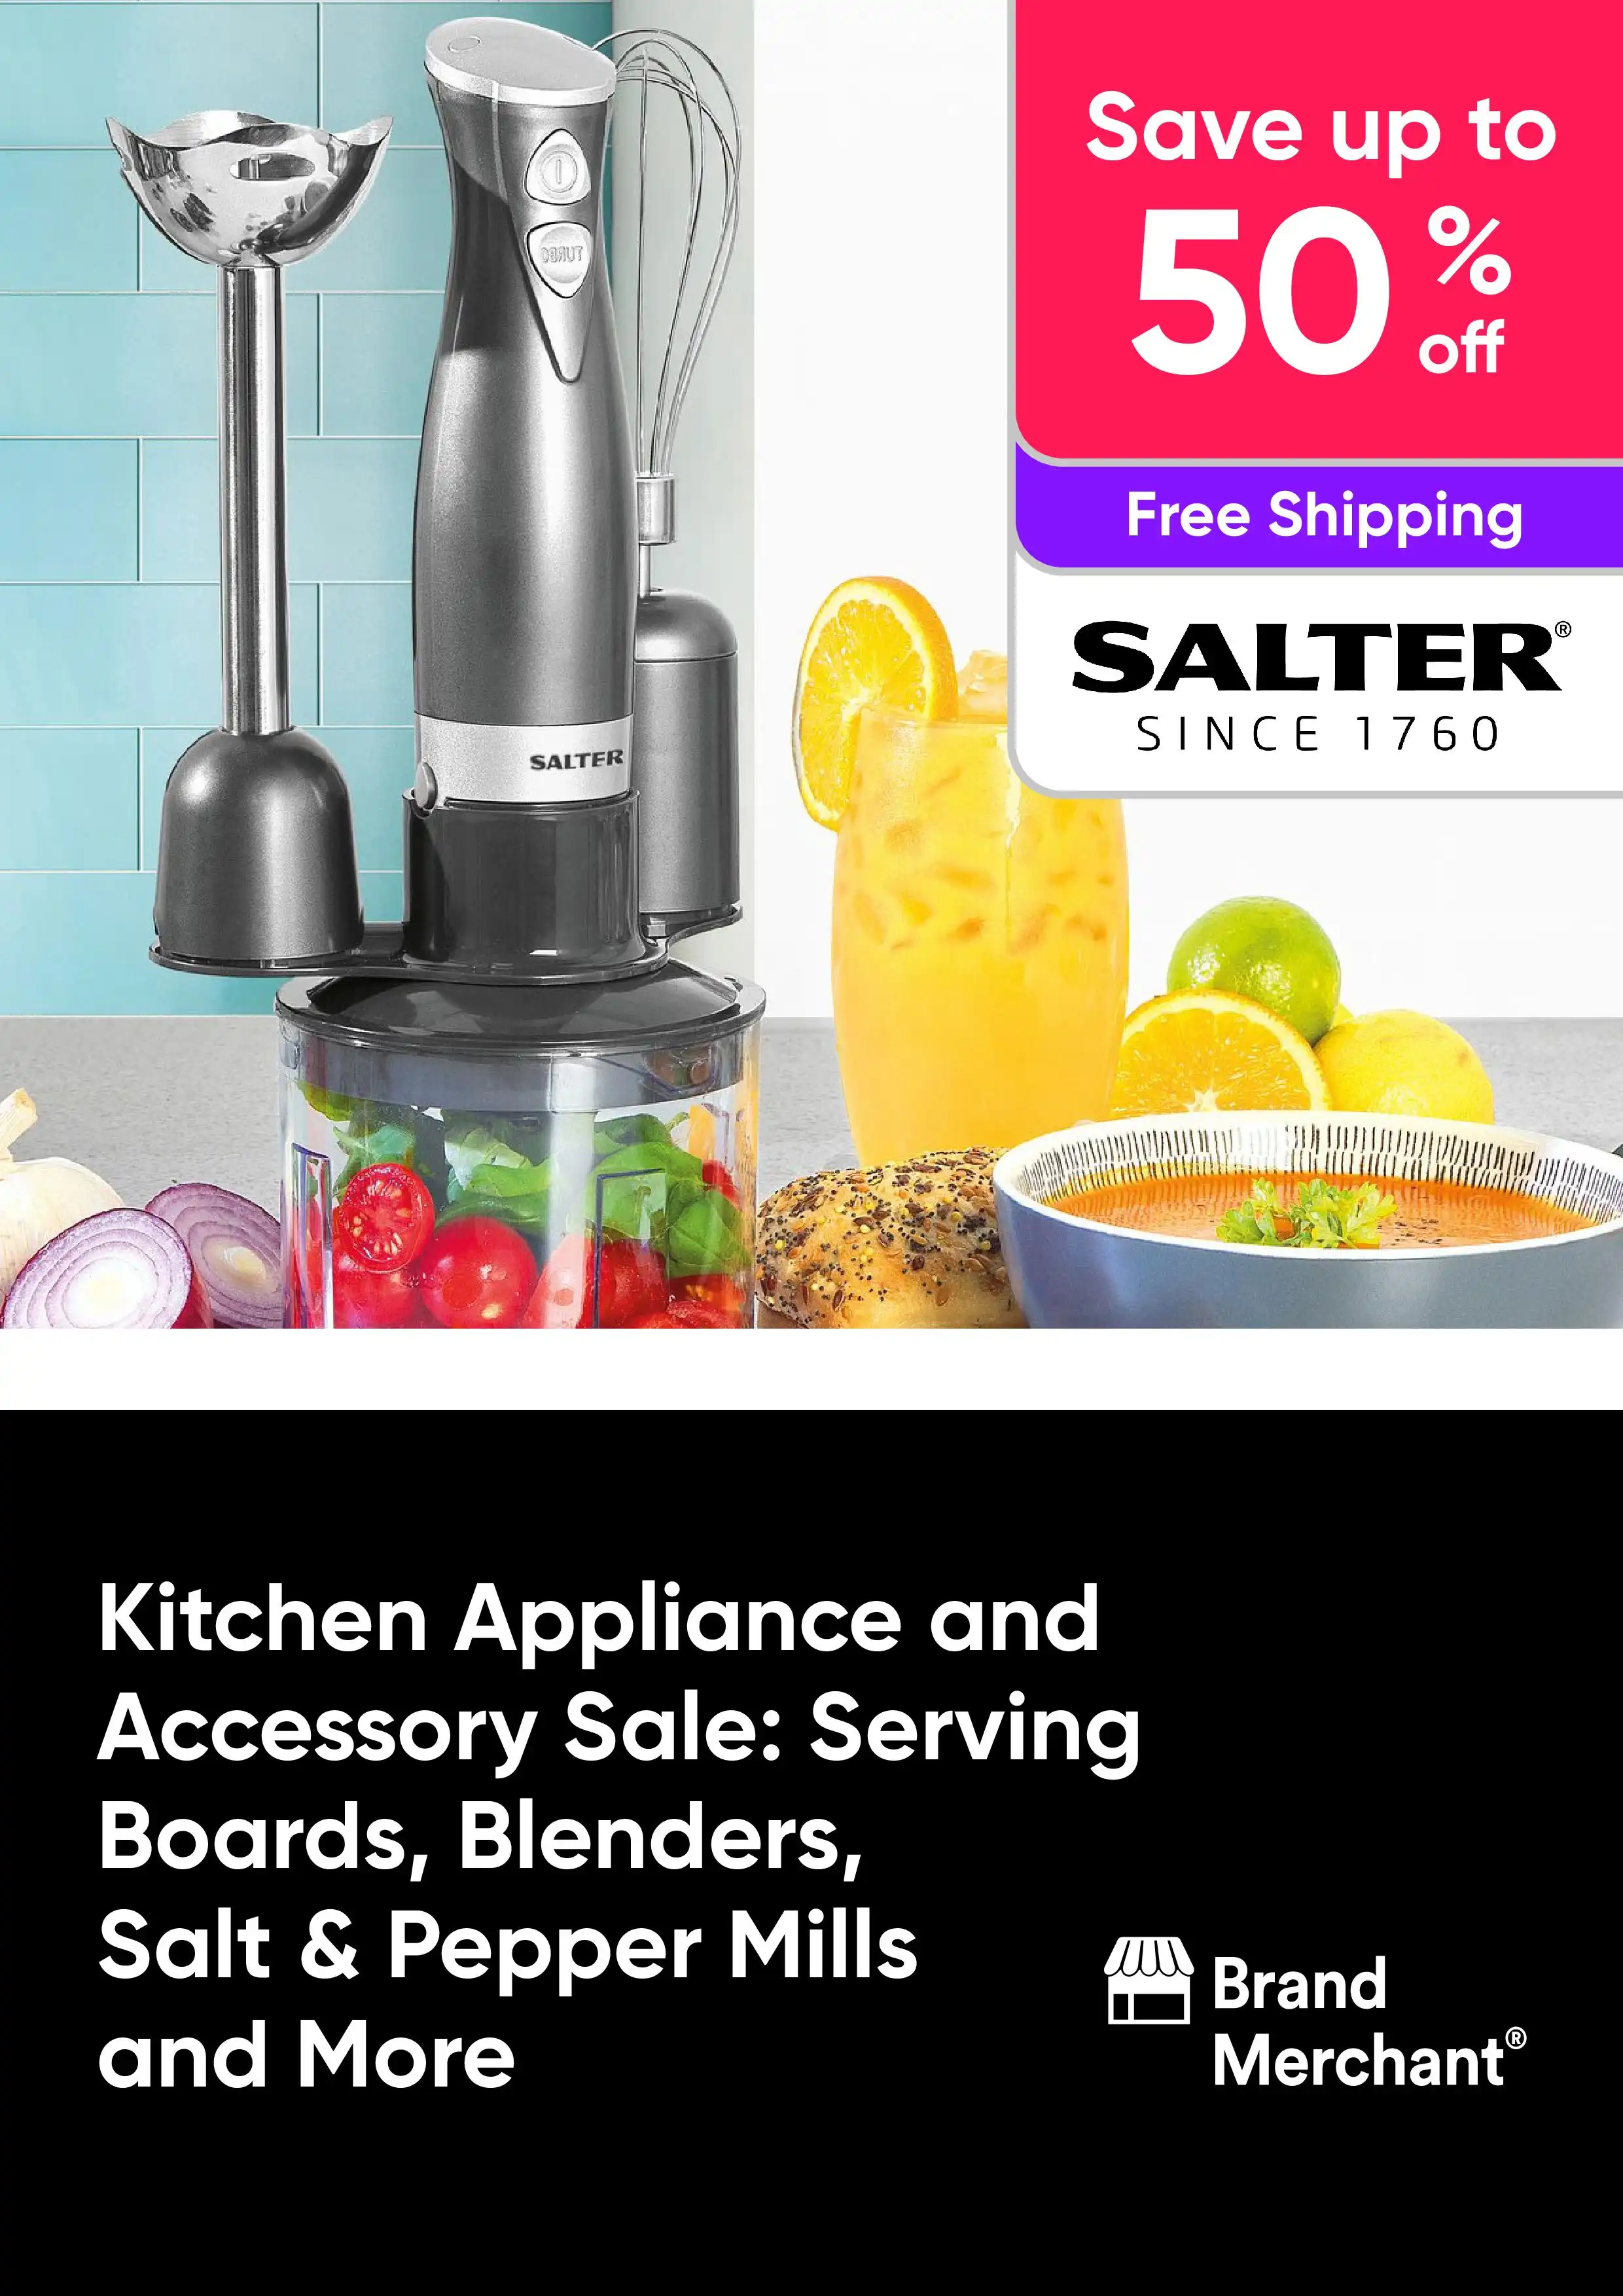 Kitchen Appliance and Accessory Sale: Serving Boards, Blenders, Salt & Pepper Mills and More - Salter - up to 50% off